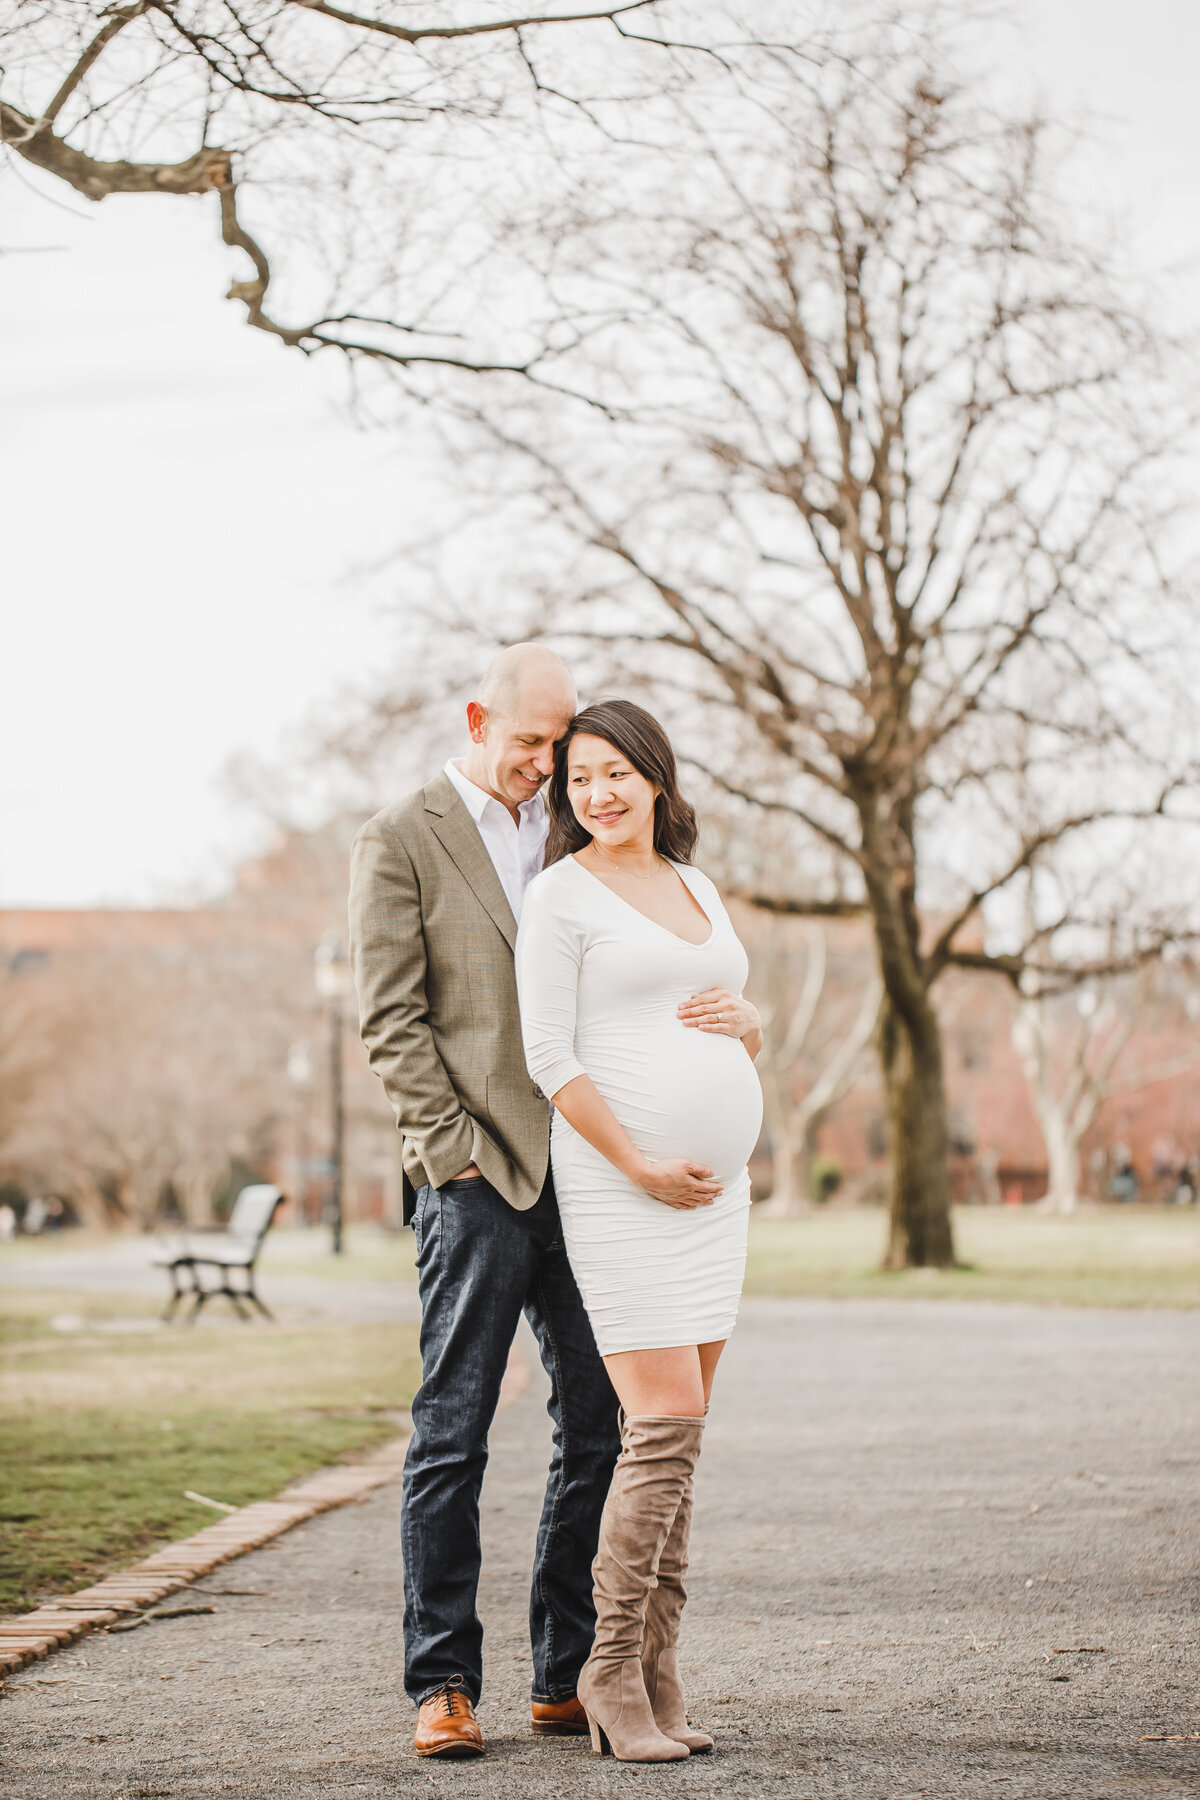 Son+ Pete - Virginia Maternity Photographer - Photography by Amy Nicole-37-3